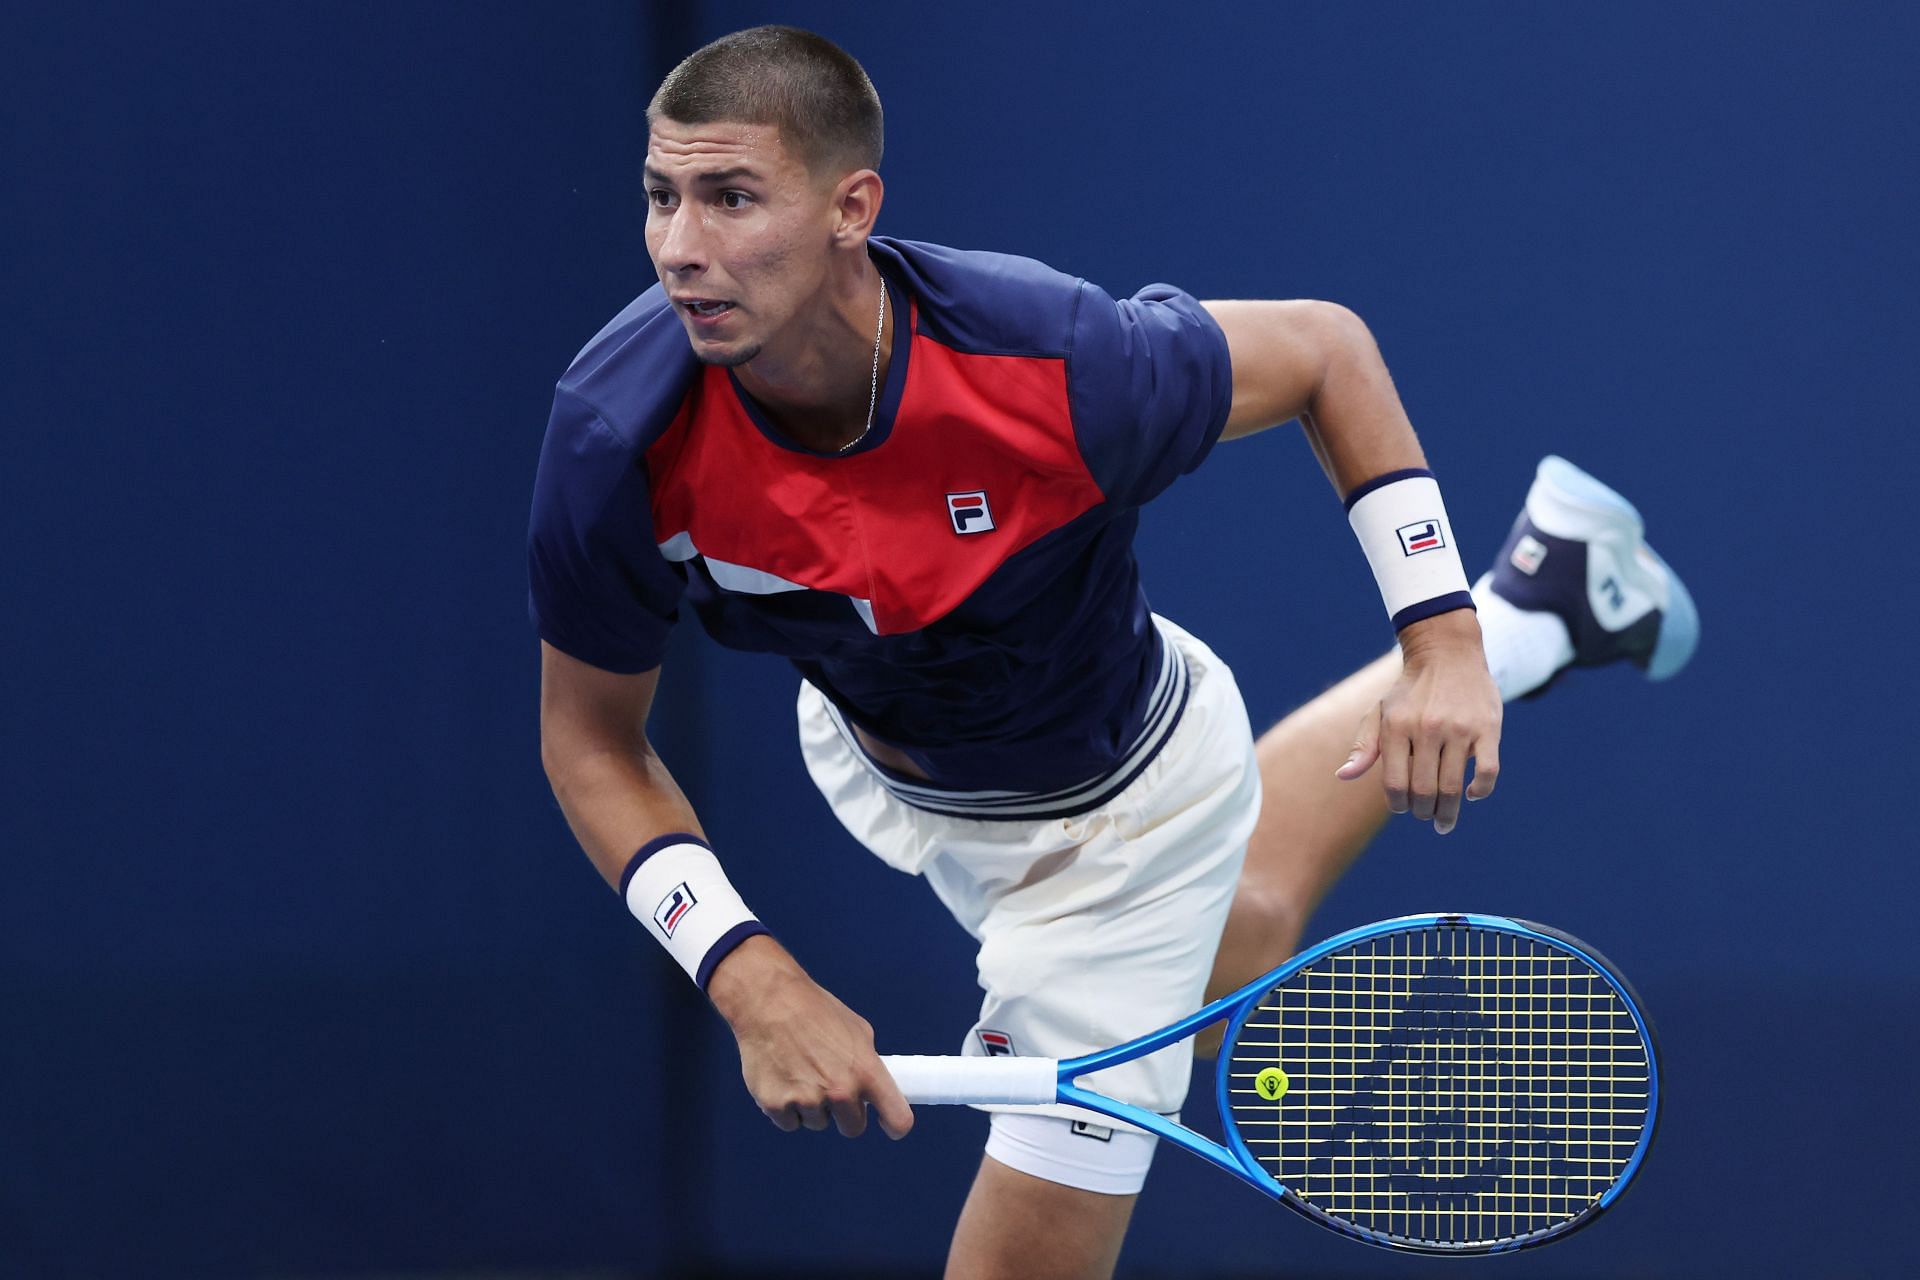 Alexei Popyrin will be aiming to reach his second semifinal of the year at the Japan Open.